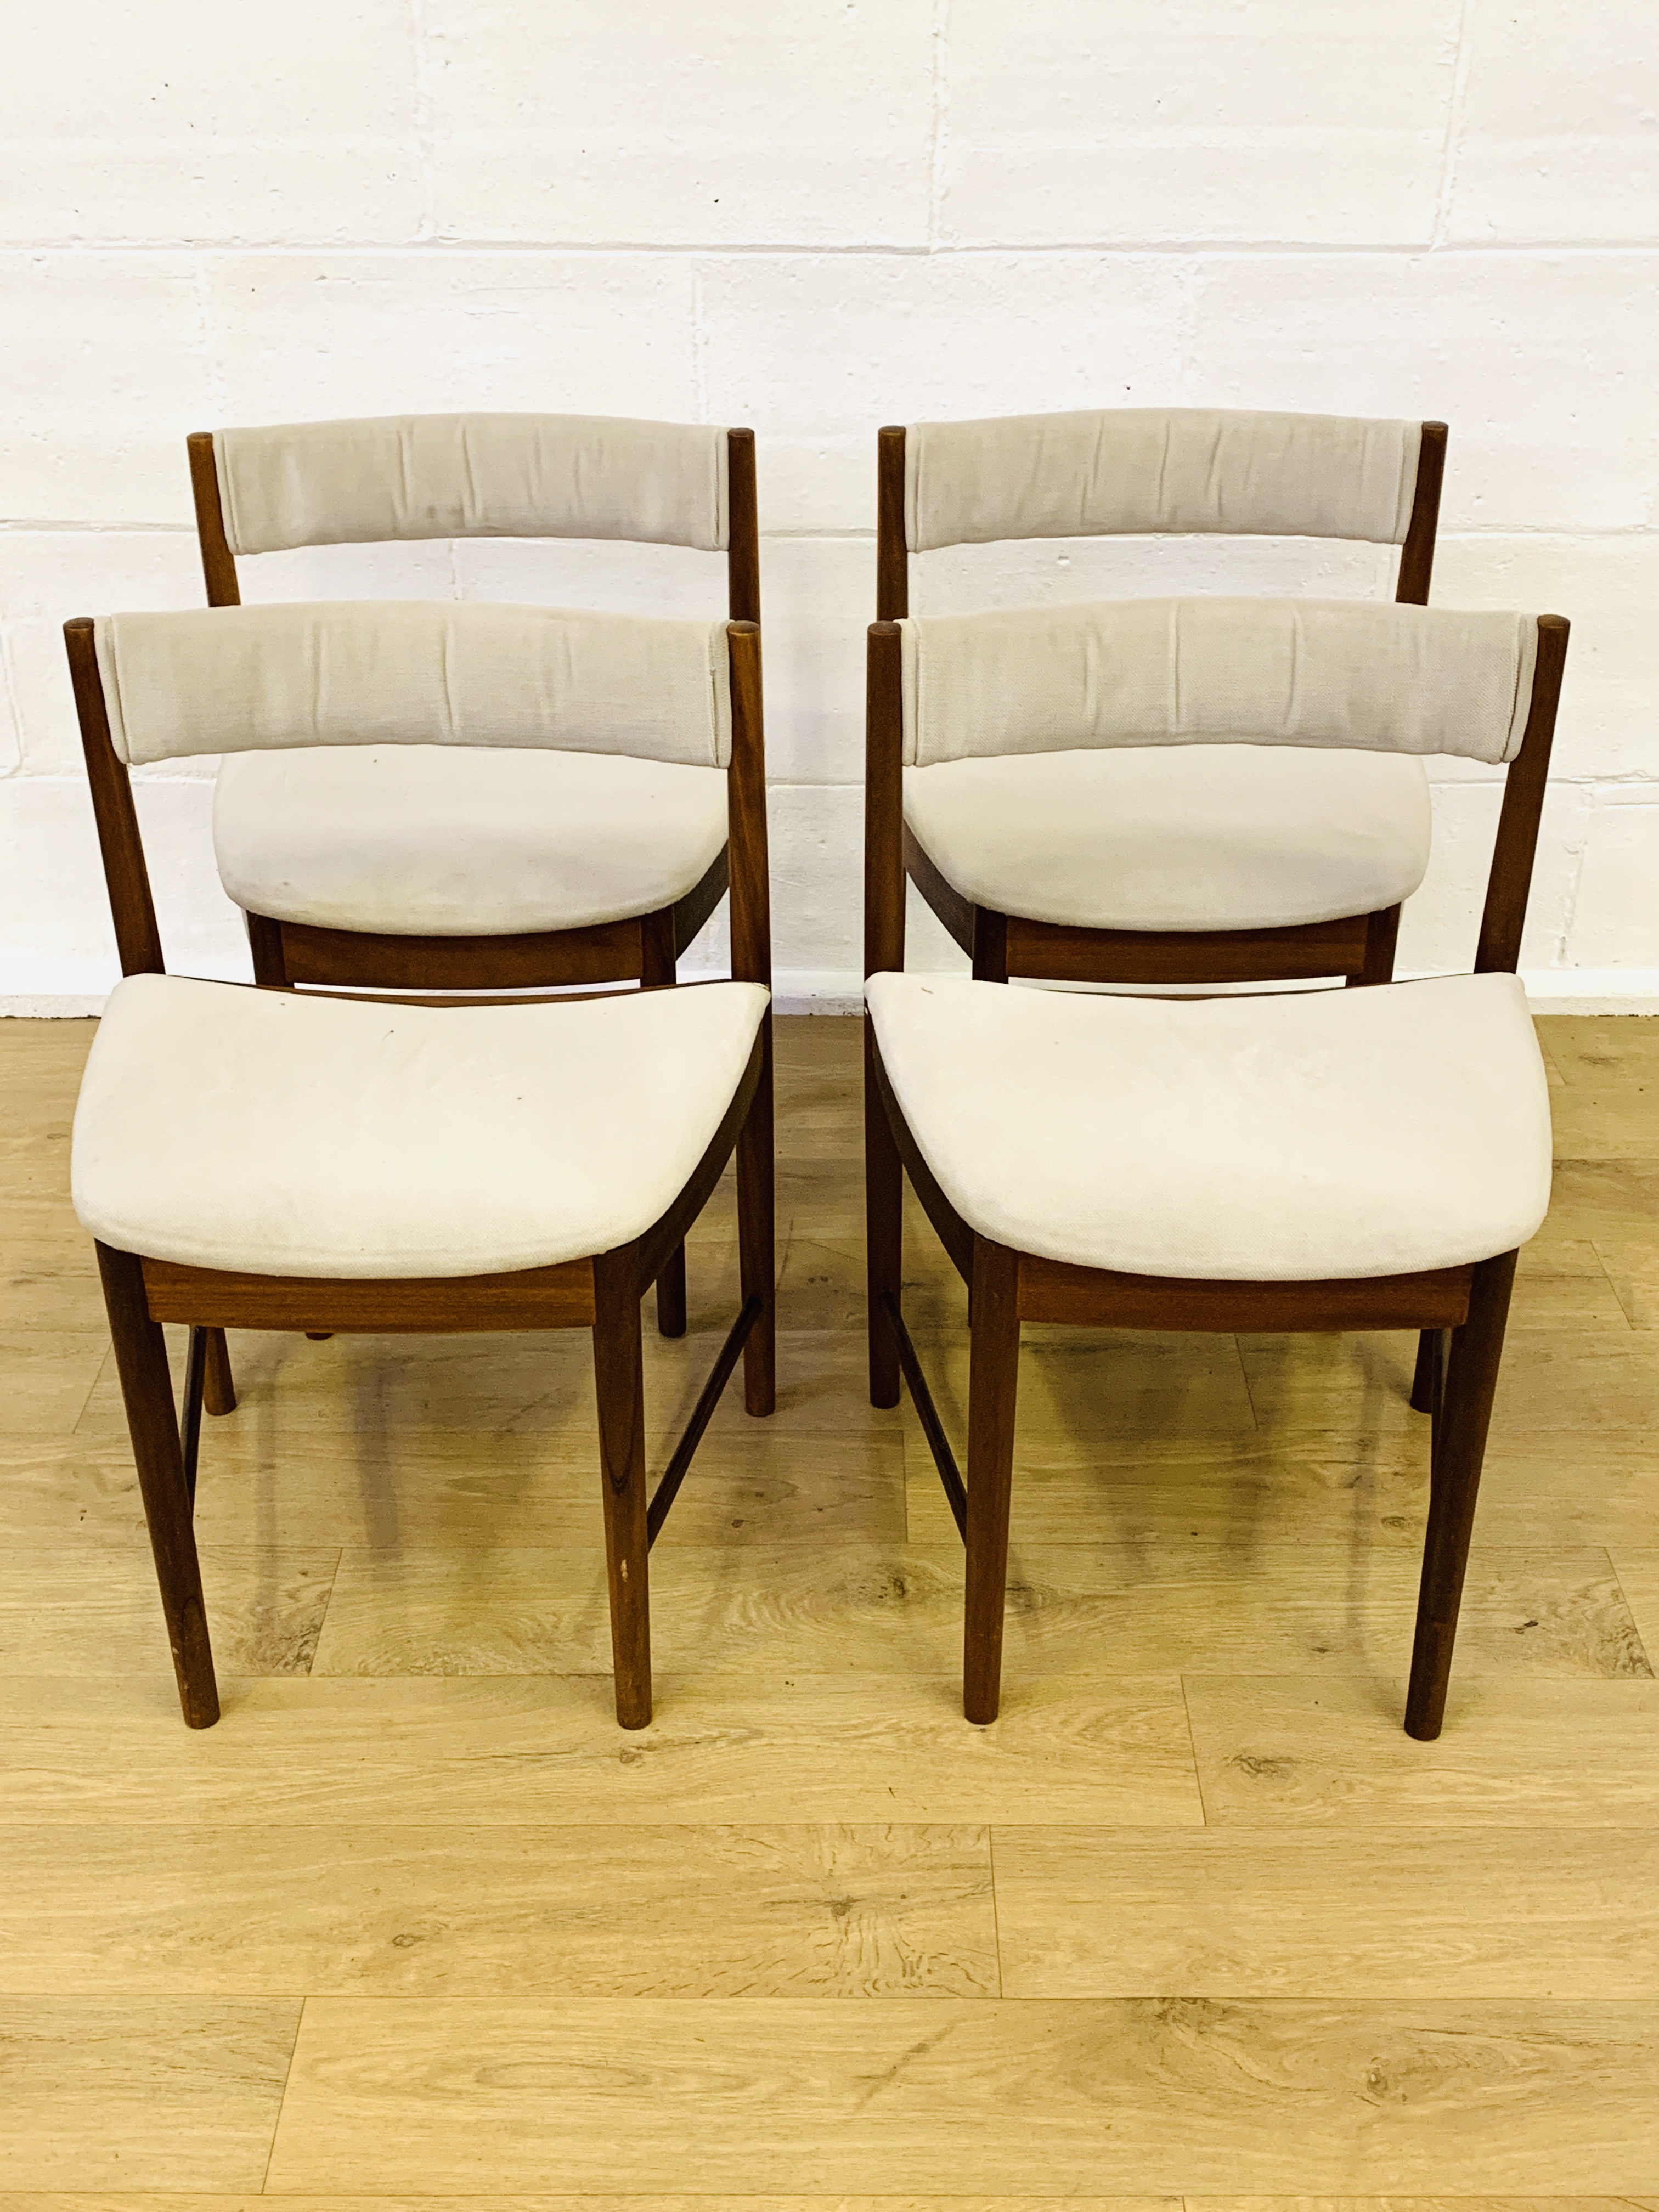 Four teak dining chairs